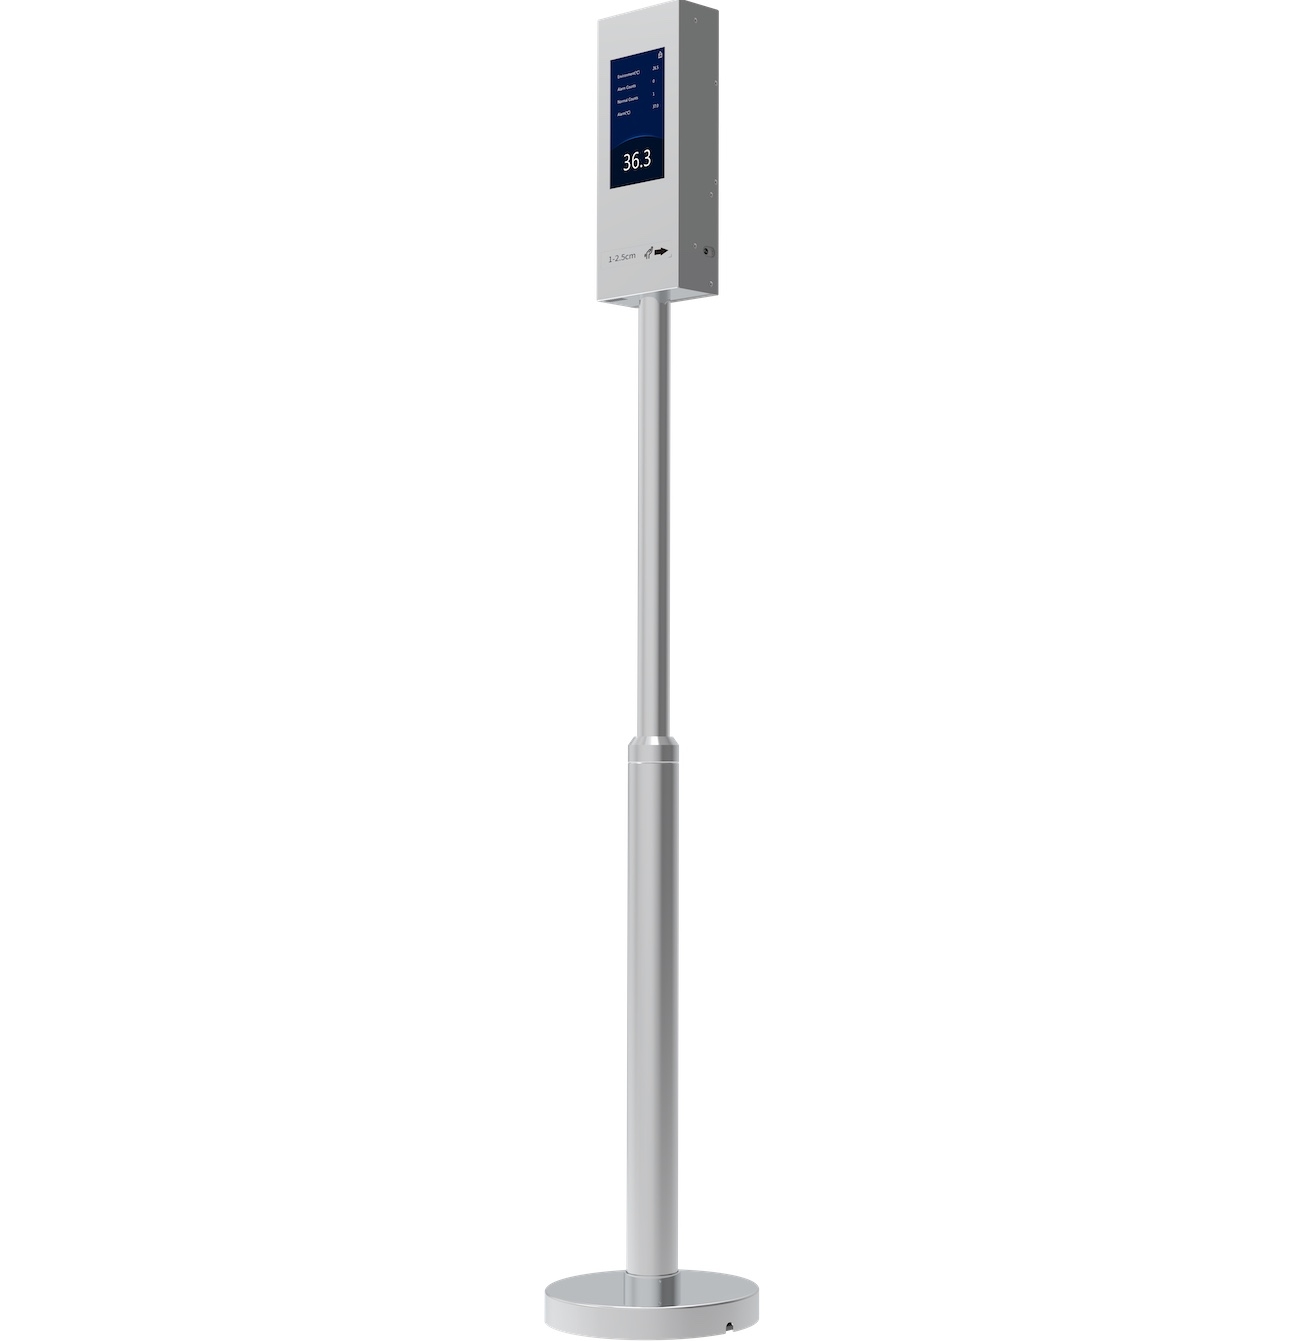 The Delphi - Pole Mounted Contact Free Fever Detection System